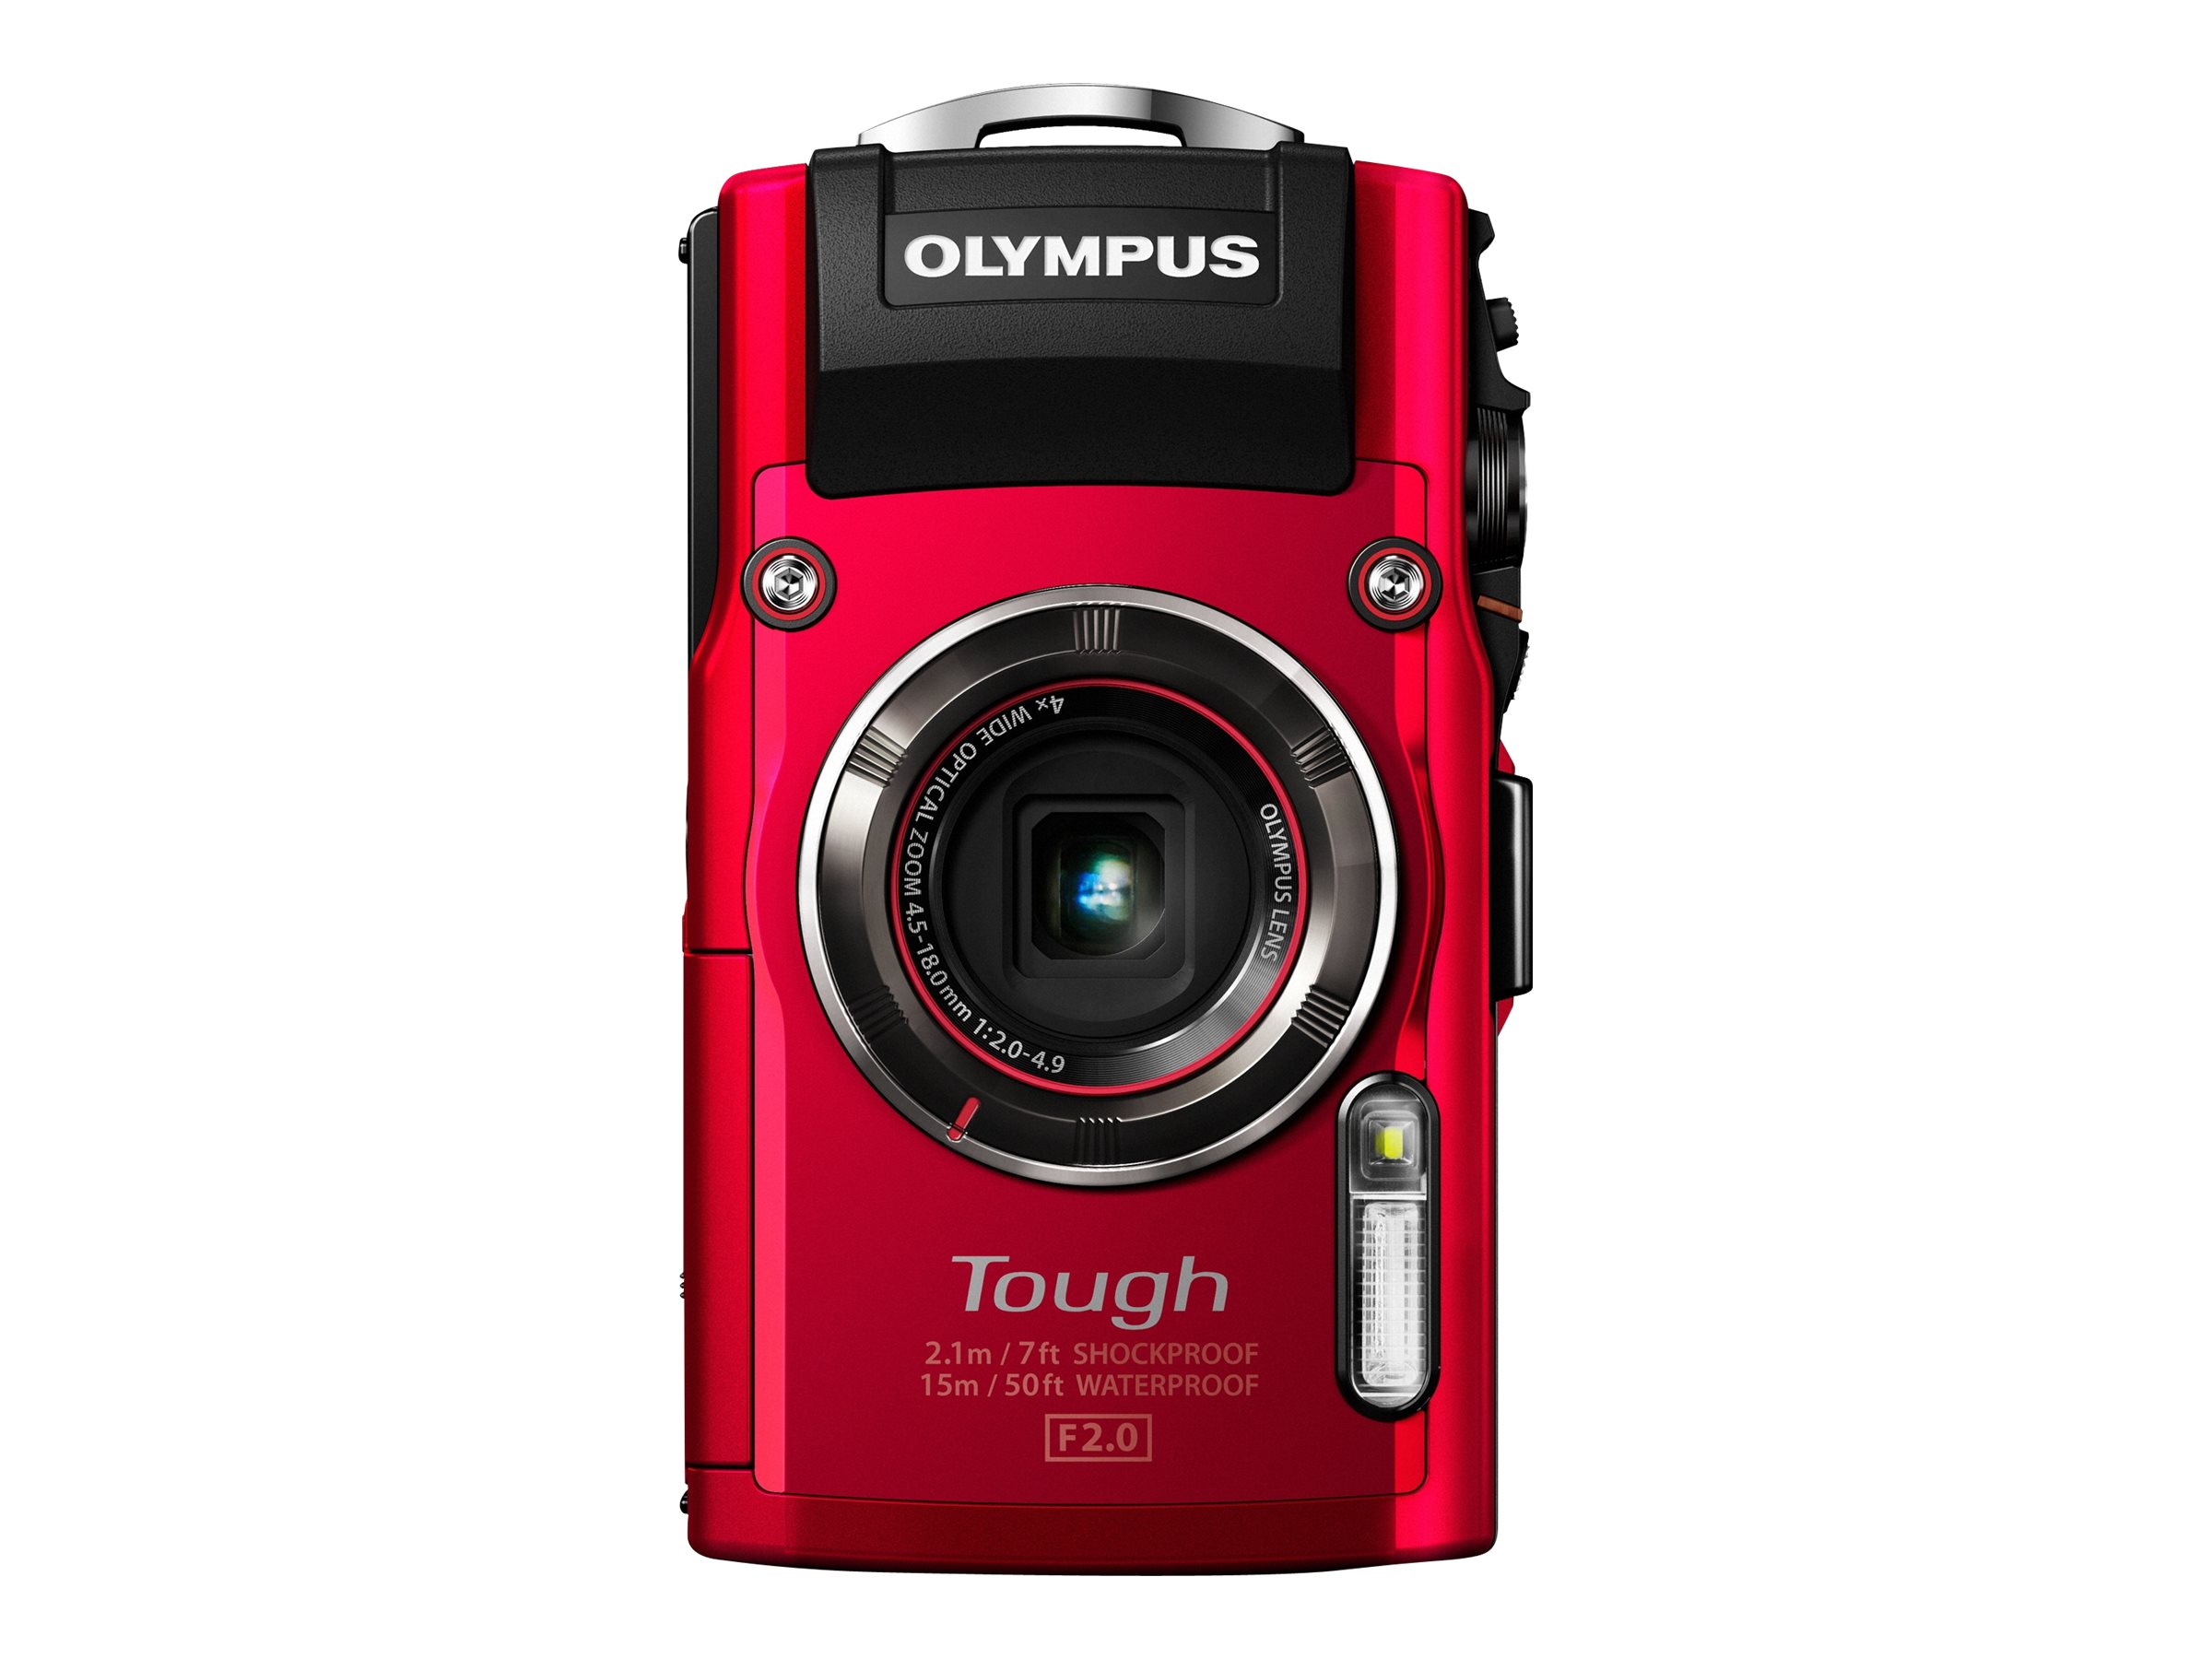 Olympus Stylus Tough TG-4 - full specs, details and review